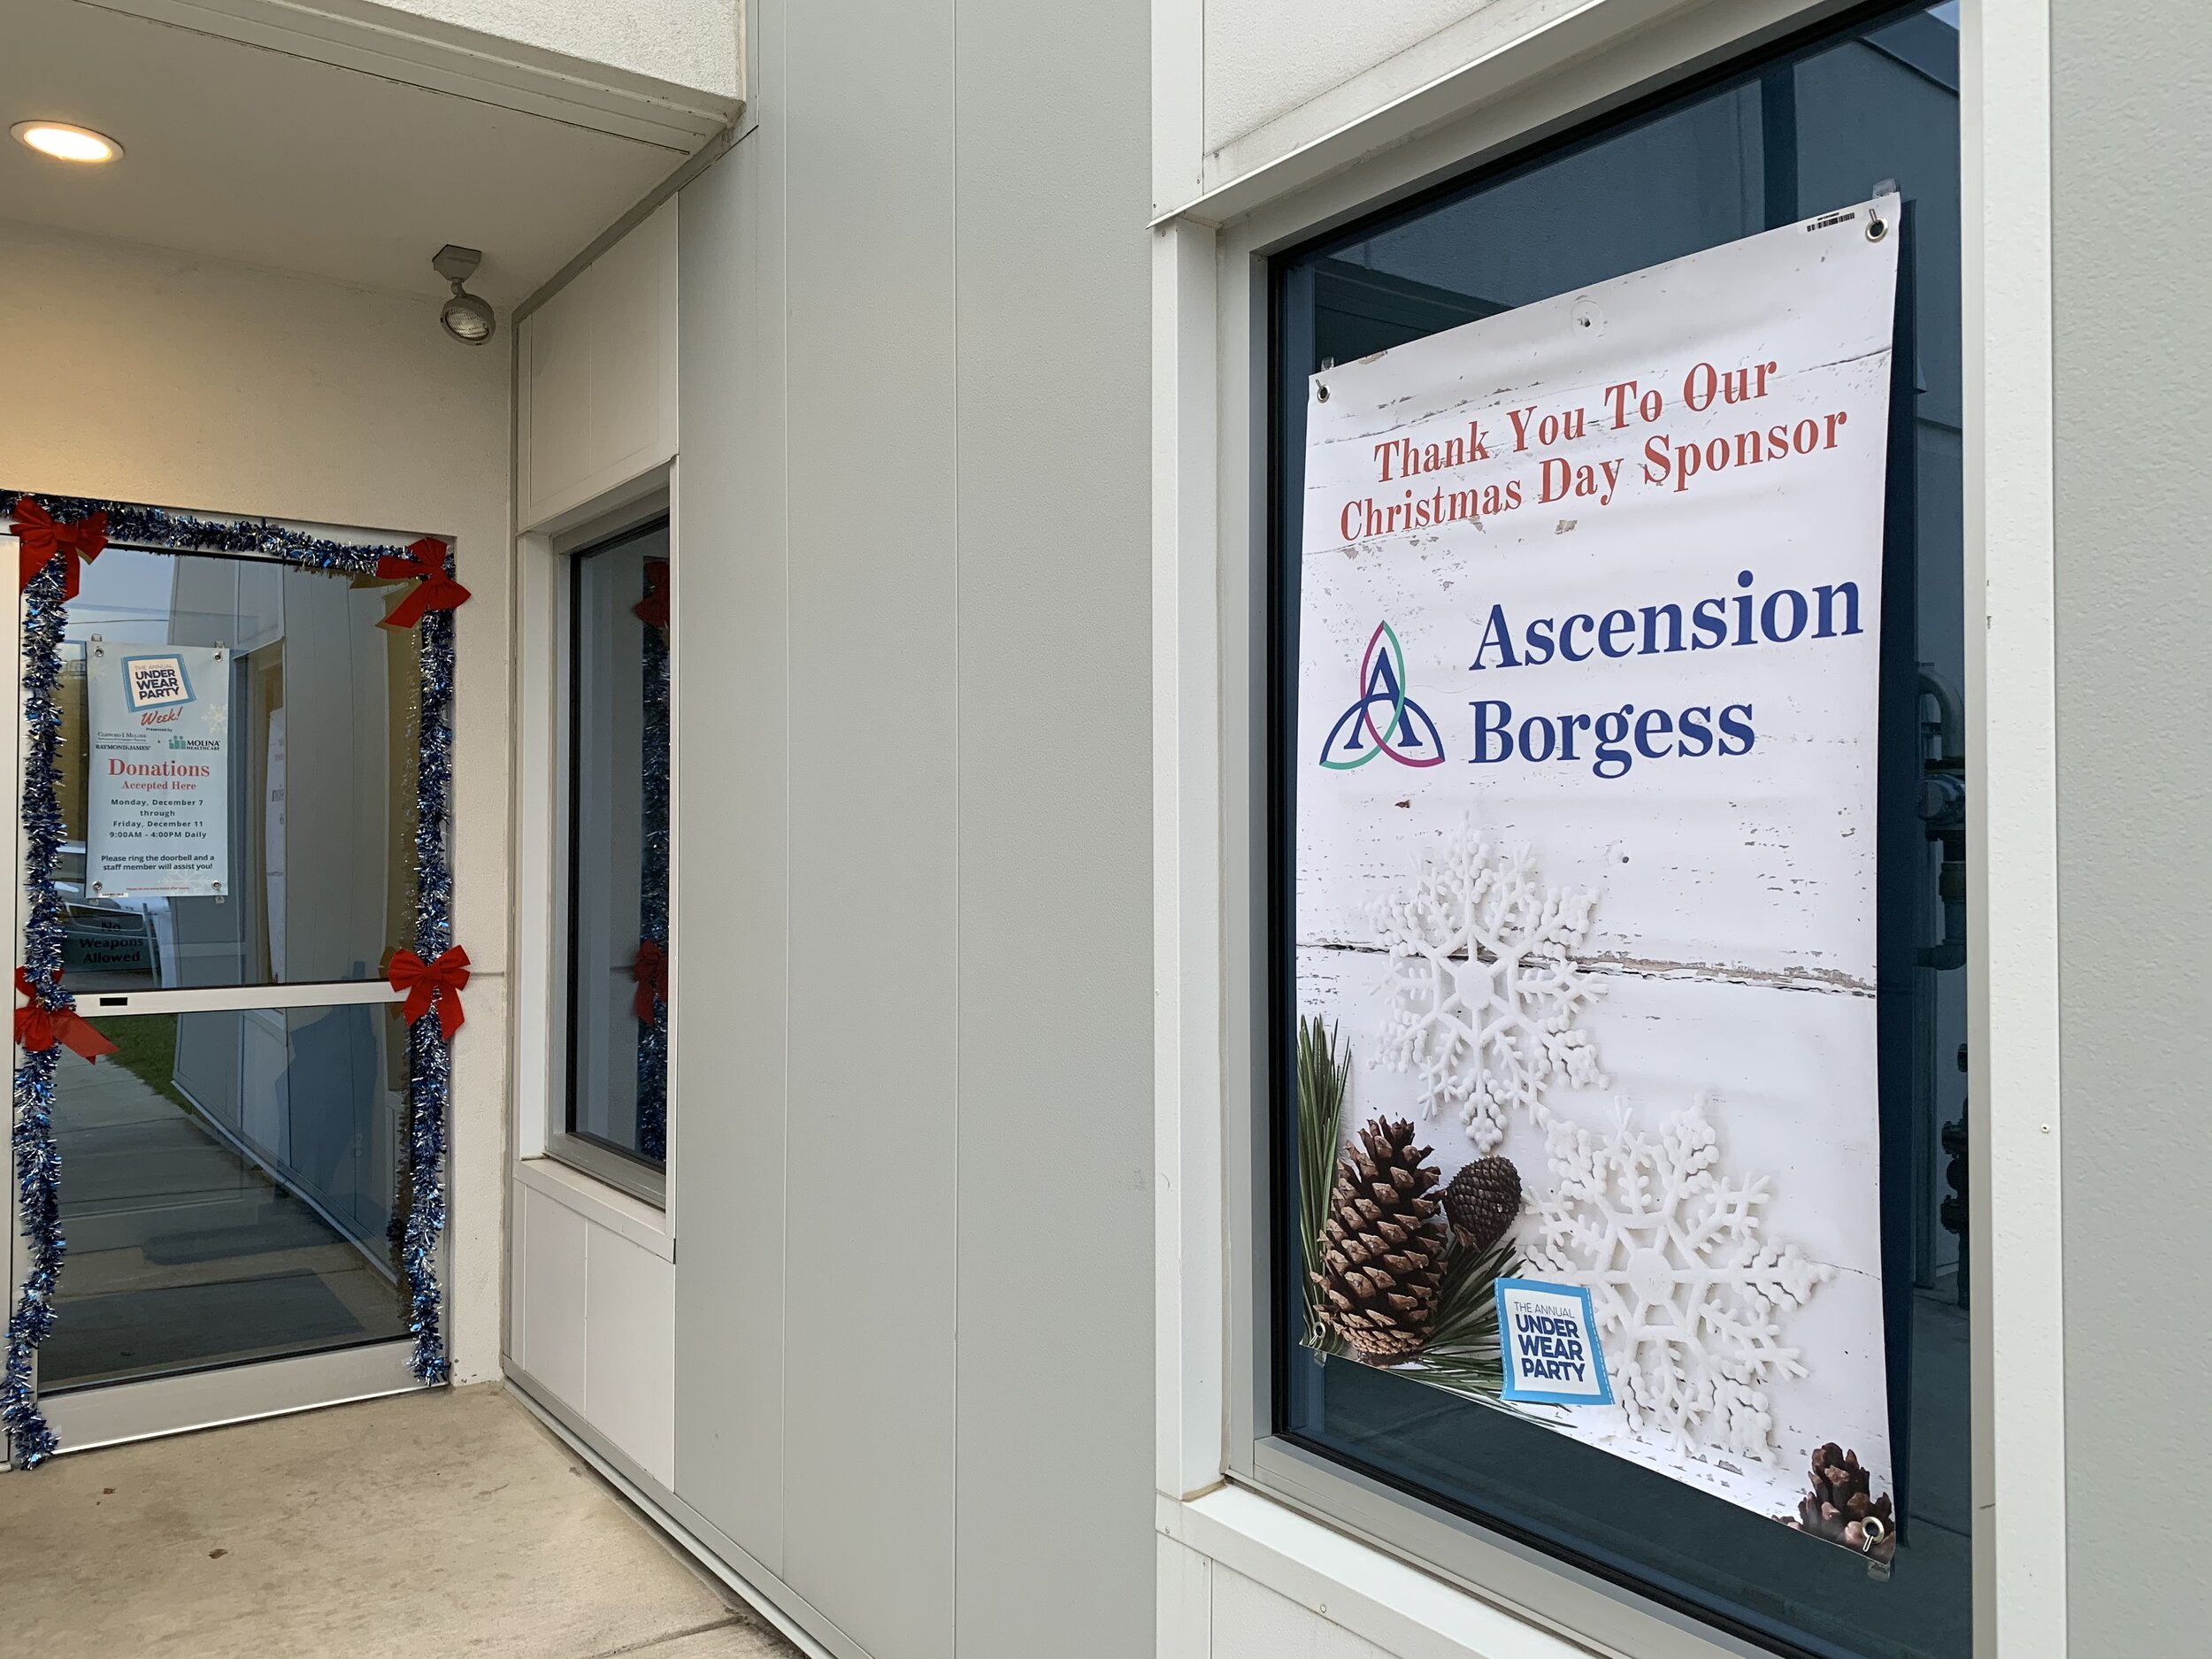  Thanks to Ascension Borgess for being our Christmas Day sponsor! 